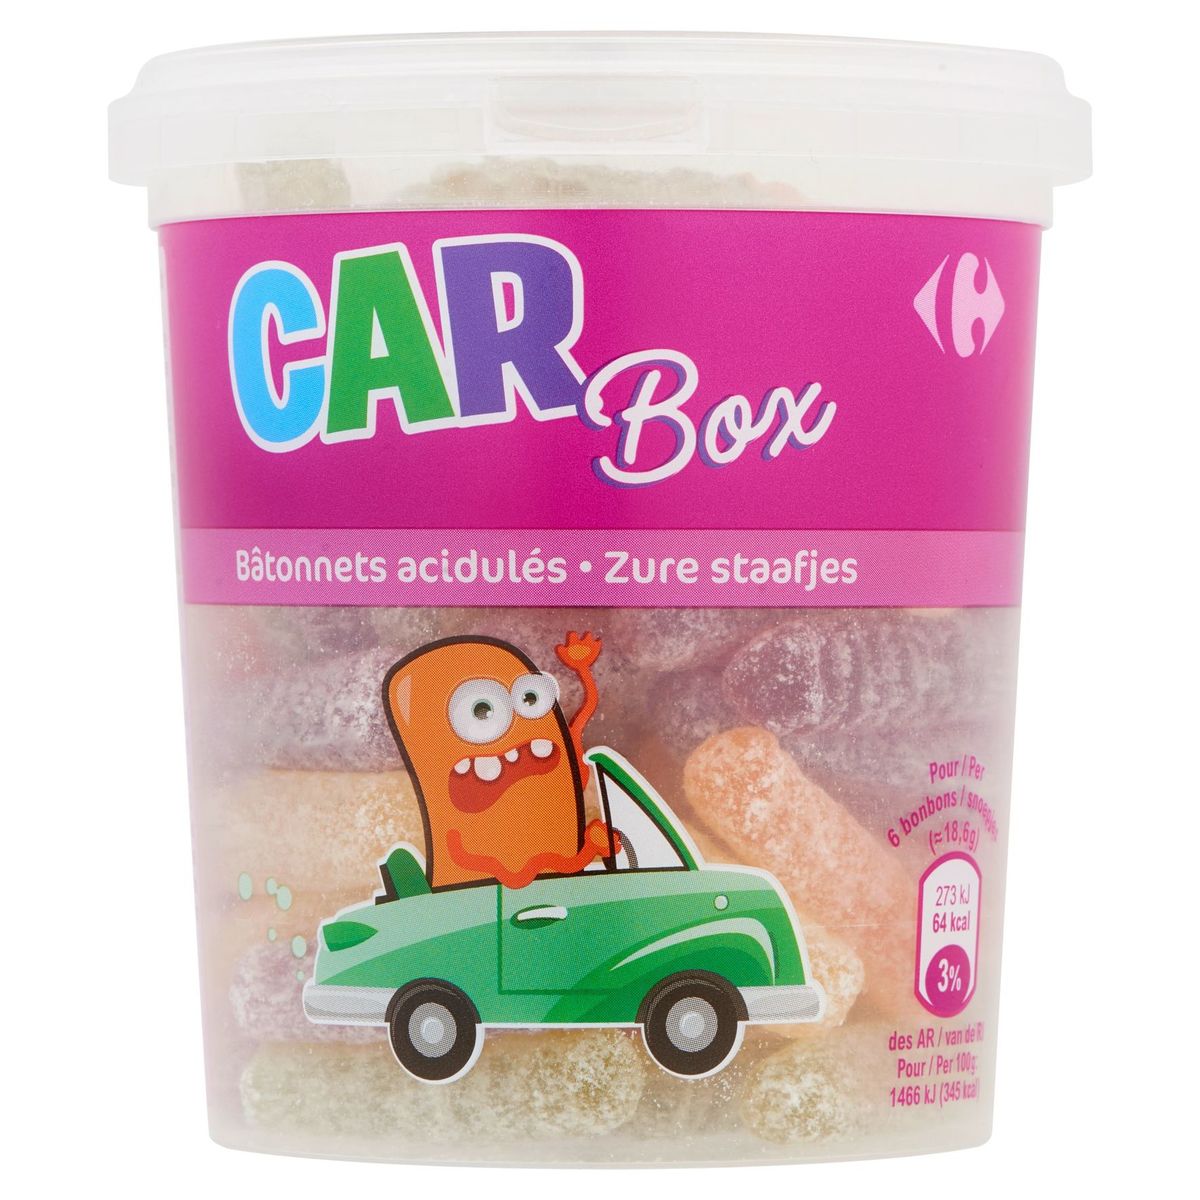 Carrefour Car Box Zure Staafjes 220 g